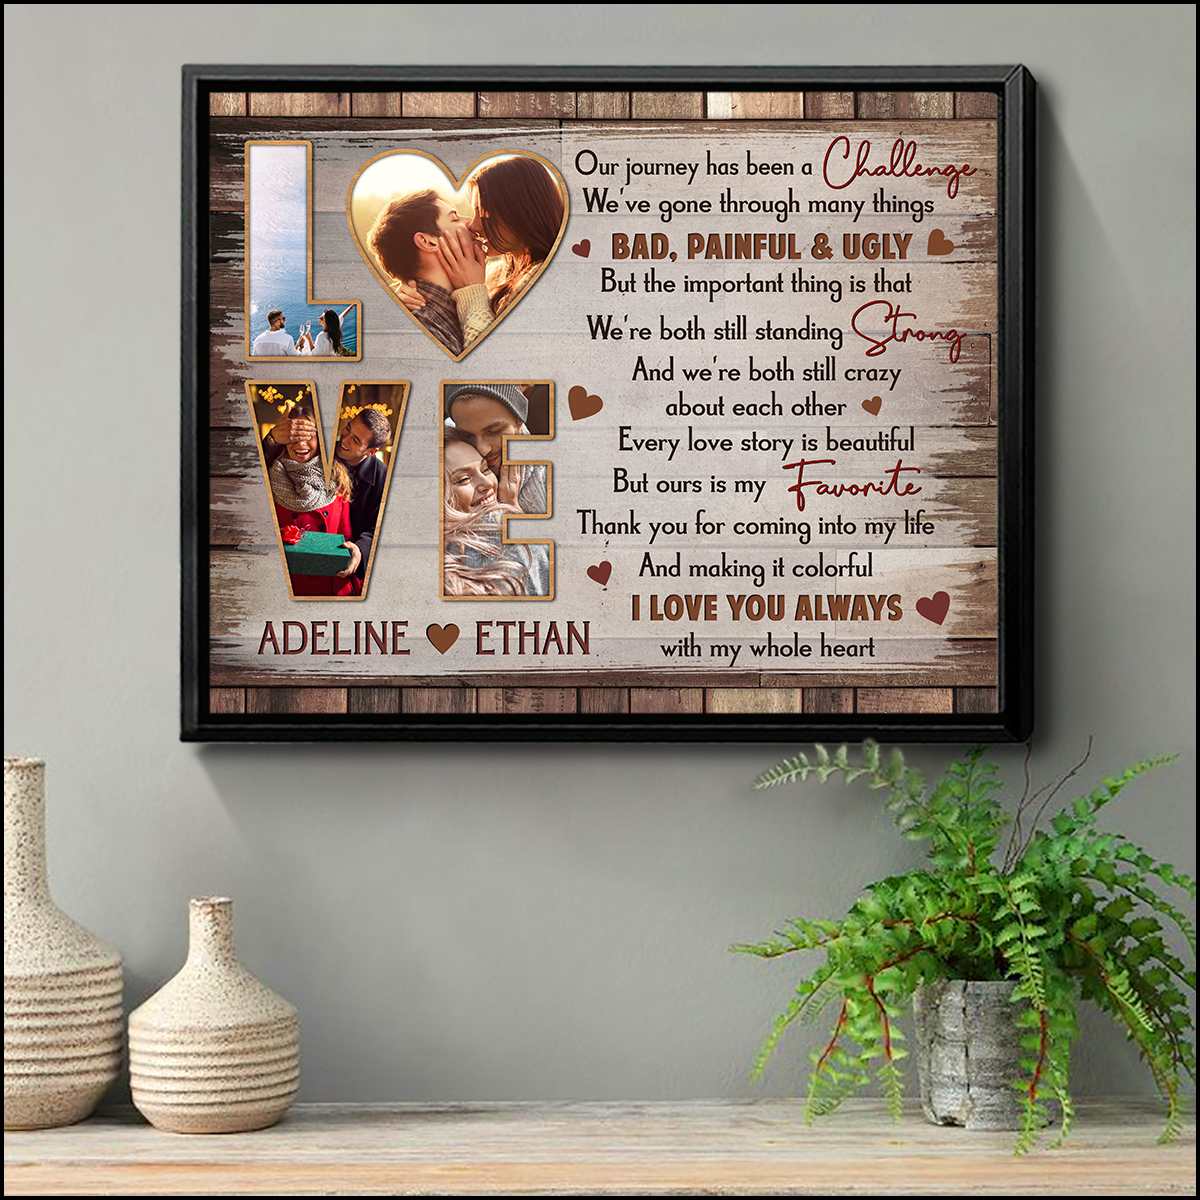 Valentines Day Gifts Custom 5 Year Wedding Anniversary Ideas, Picture  Collage Some Call It Adventure Canvas Wall Art - Magic Exhalation